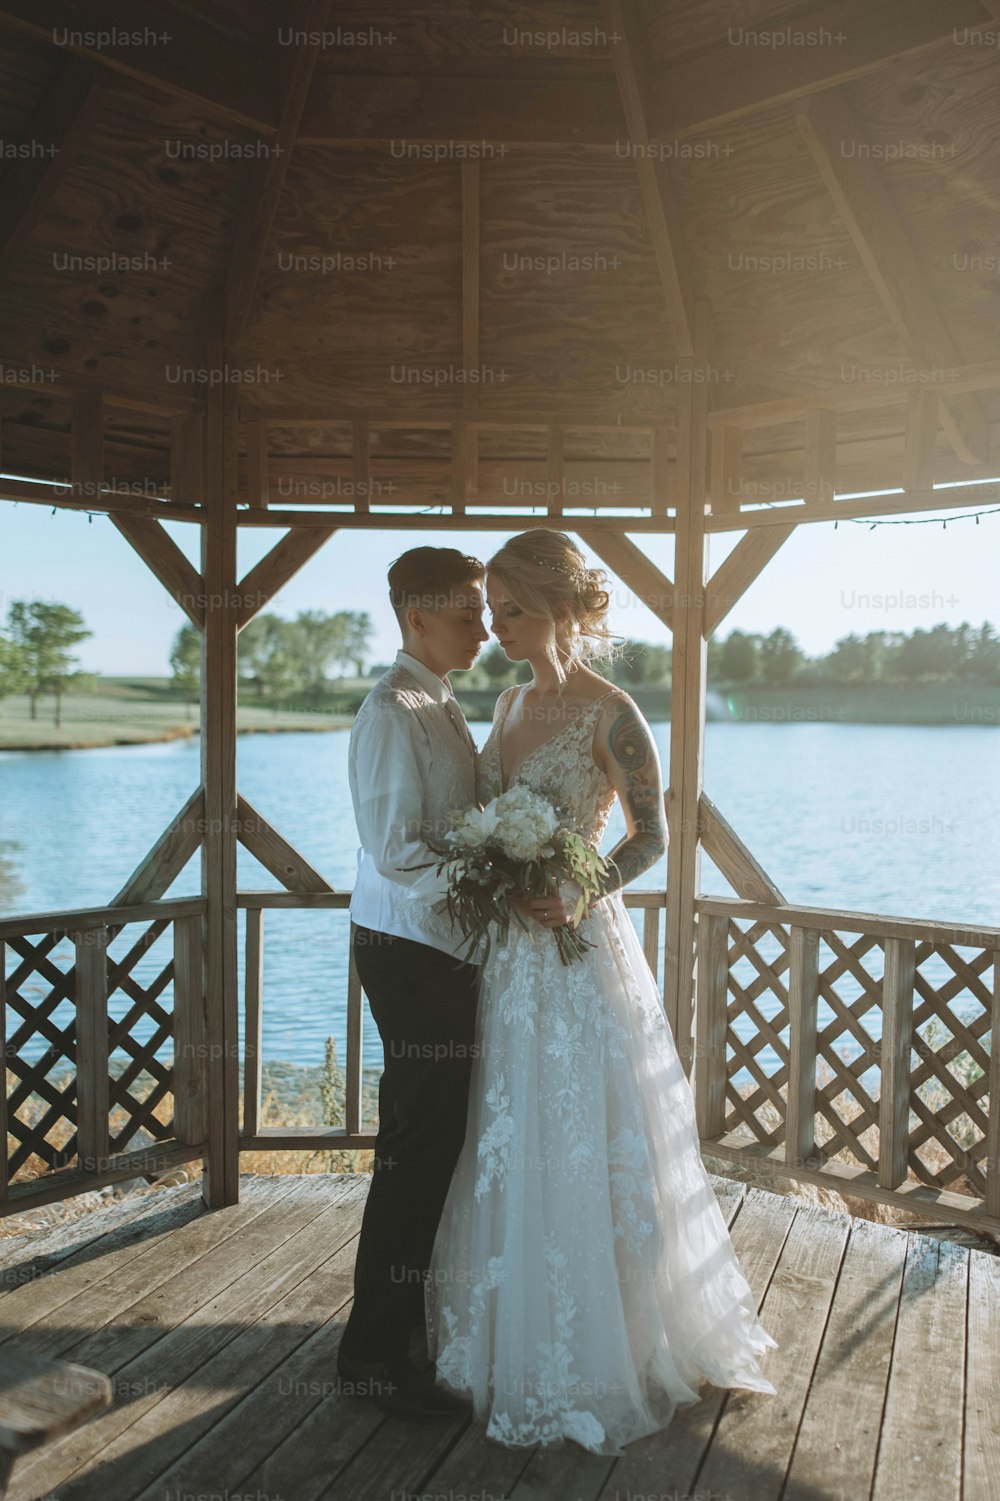 a bride and groom standing on a wooden deck next to a body of water